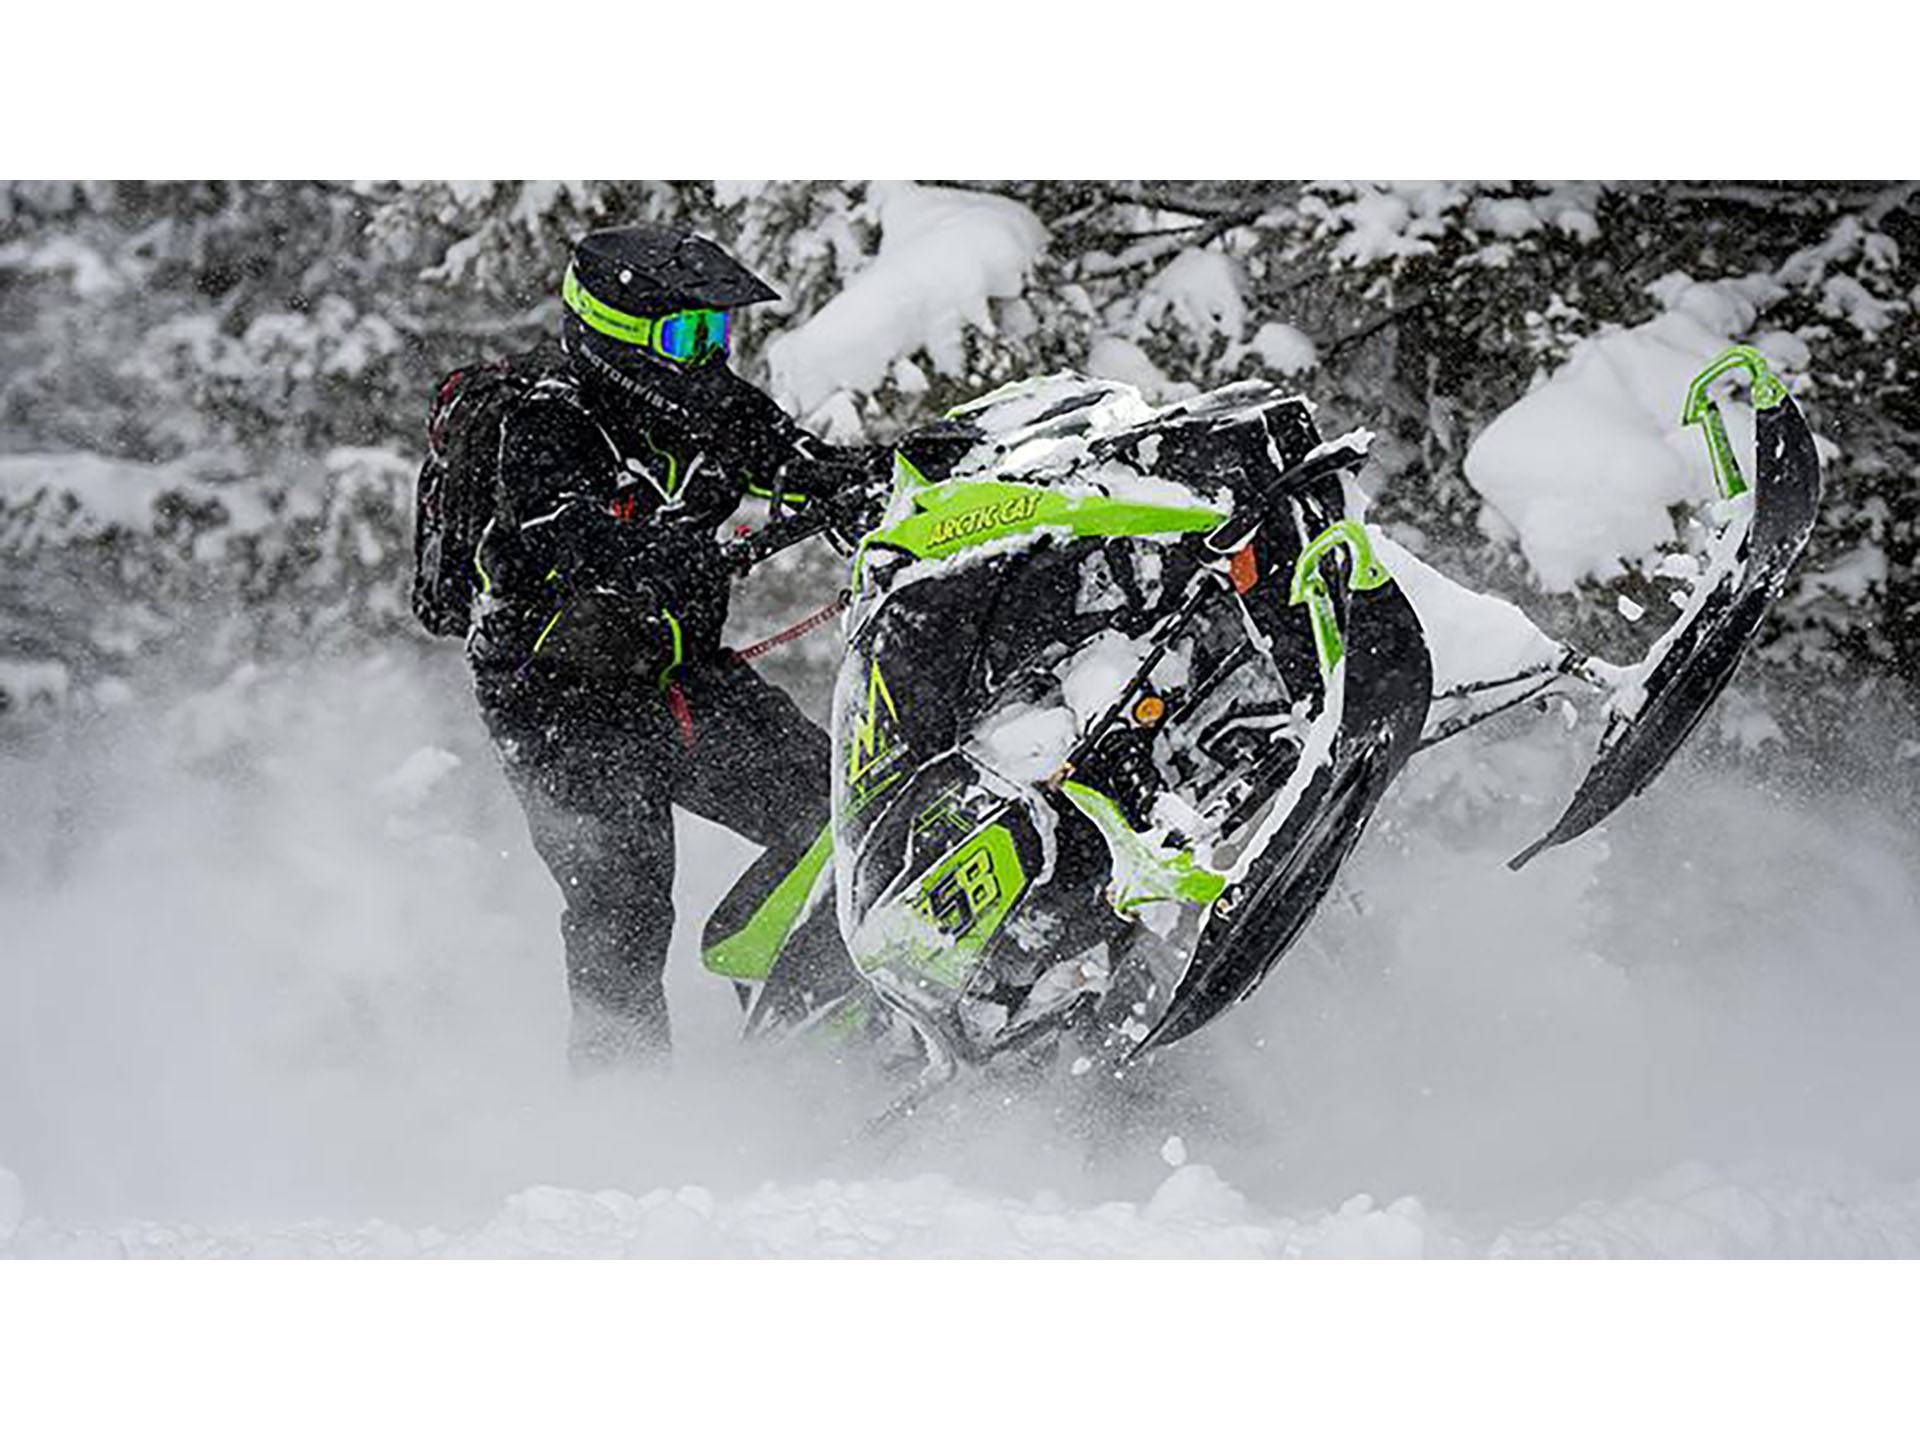 2025 Arctic Cat M 858 Alpha One Sno Pro 165 3.0 in Lincoln, Maine - Photo 6